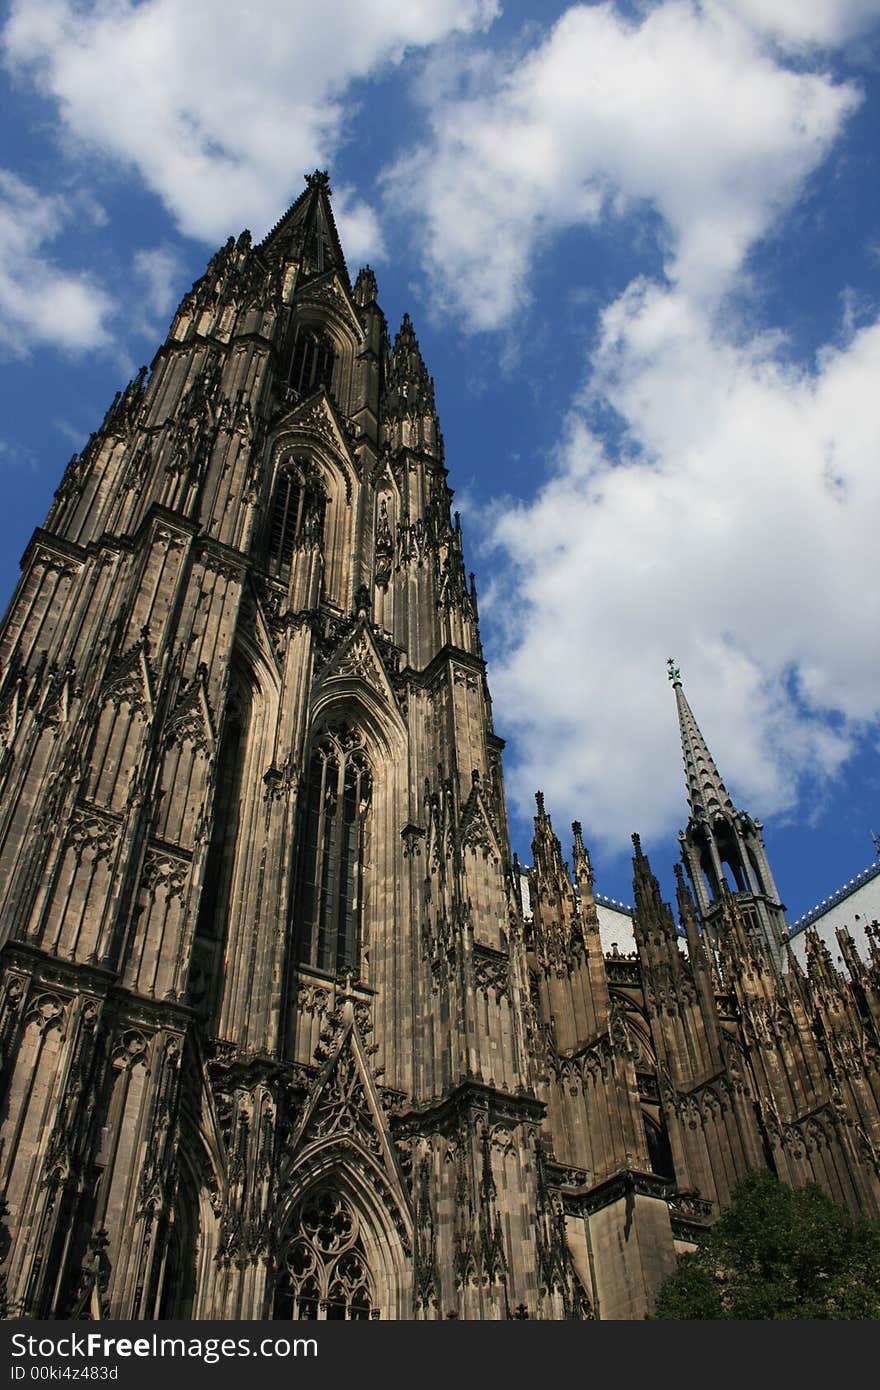 A view of the Cologne Cathedral, Germany.